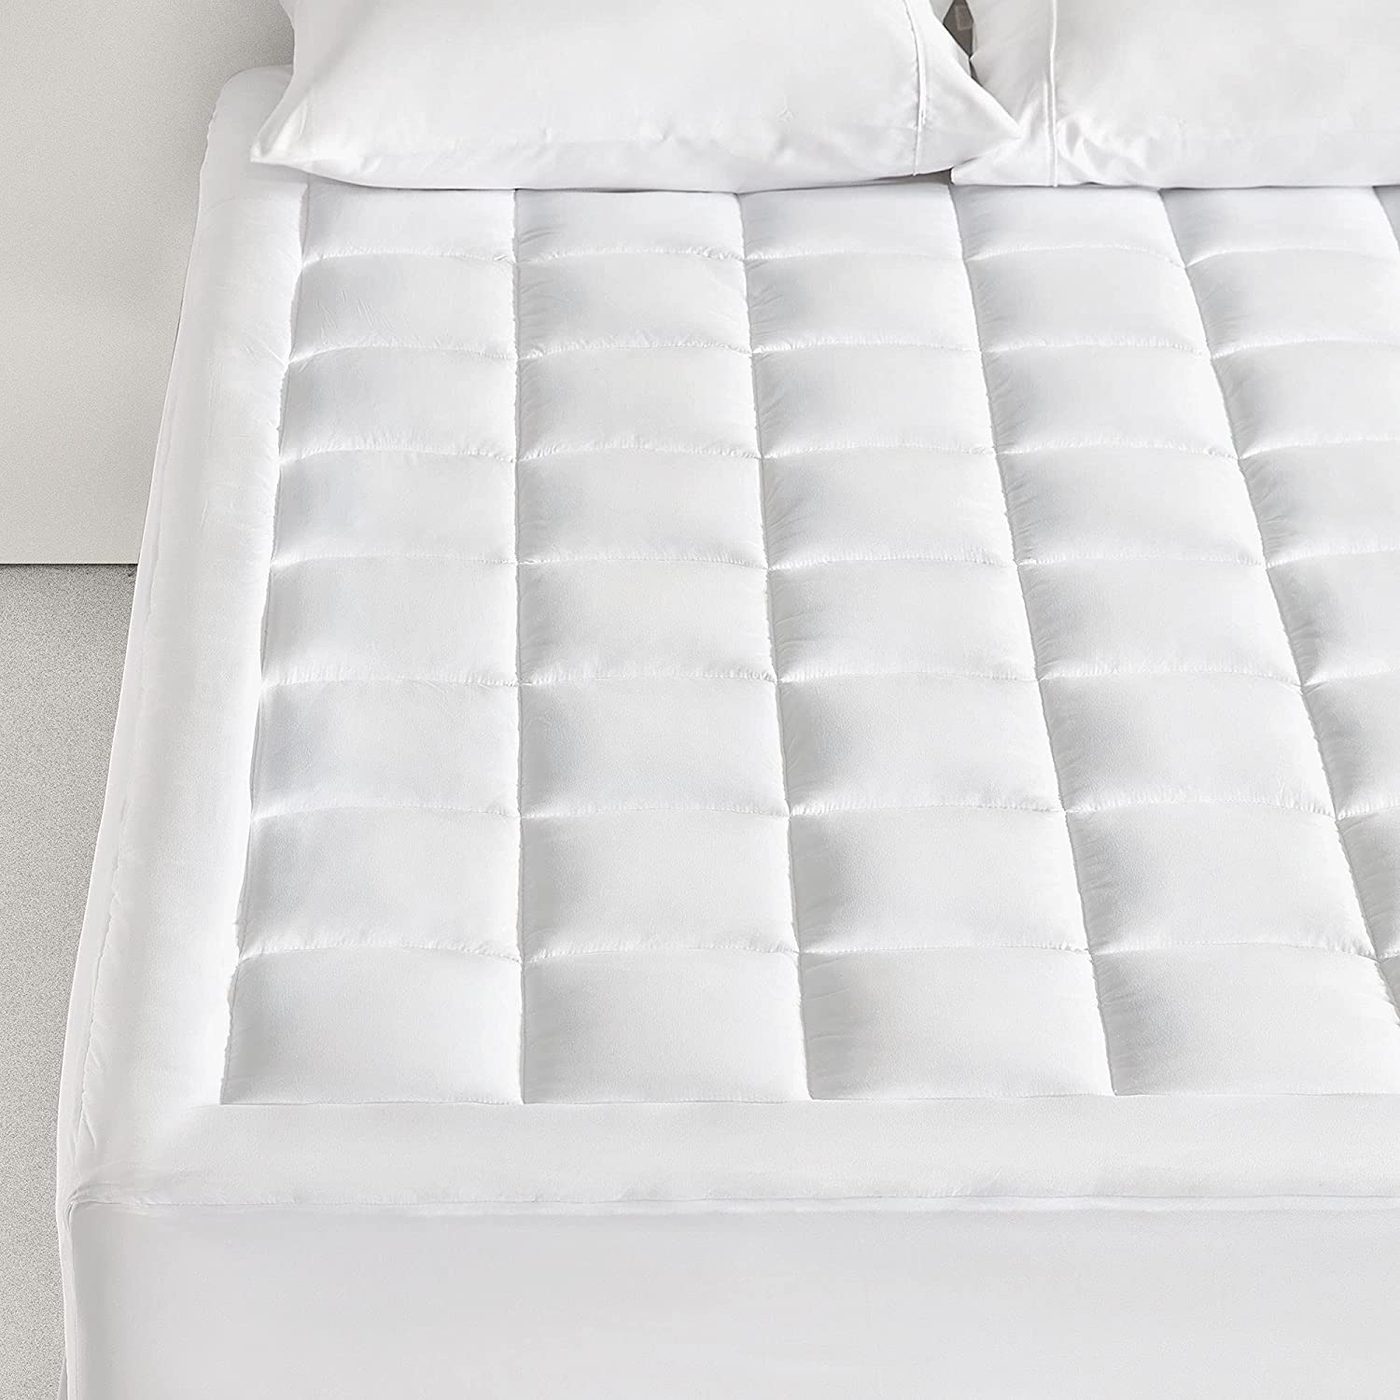 SONIVE Quilted Mattress Pad Soft Fluffy Pillow Top Mattress Cover Down Alternative Fill Topper Streches up to 21 Inches Deep Pocket (White, Cal King)